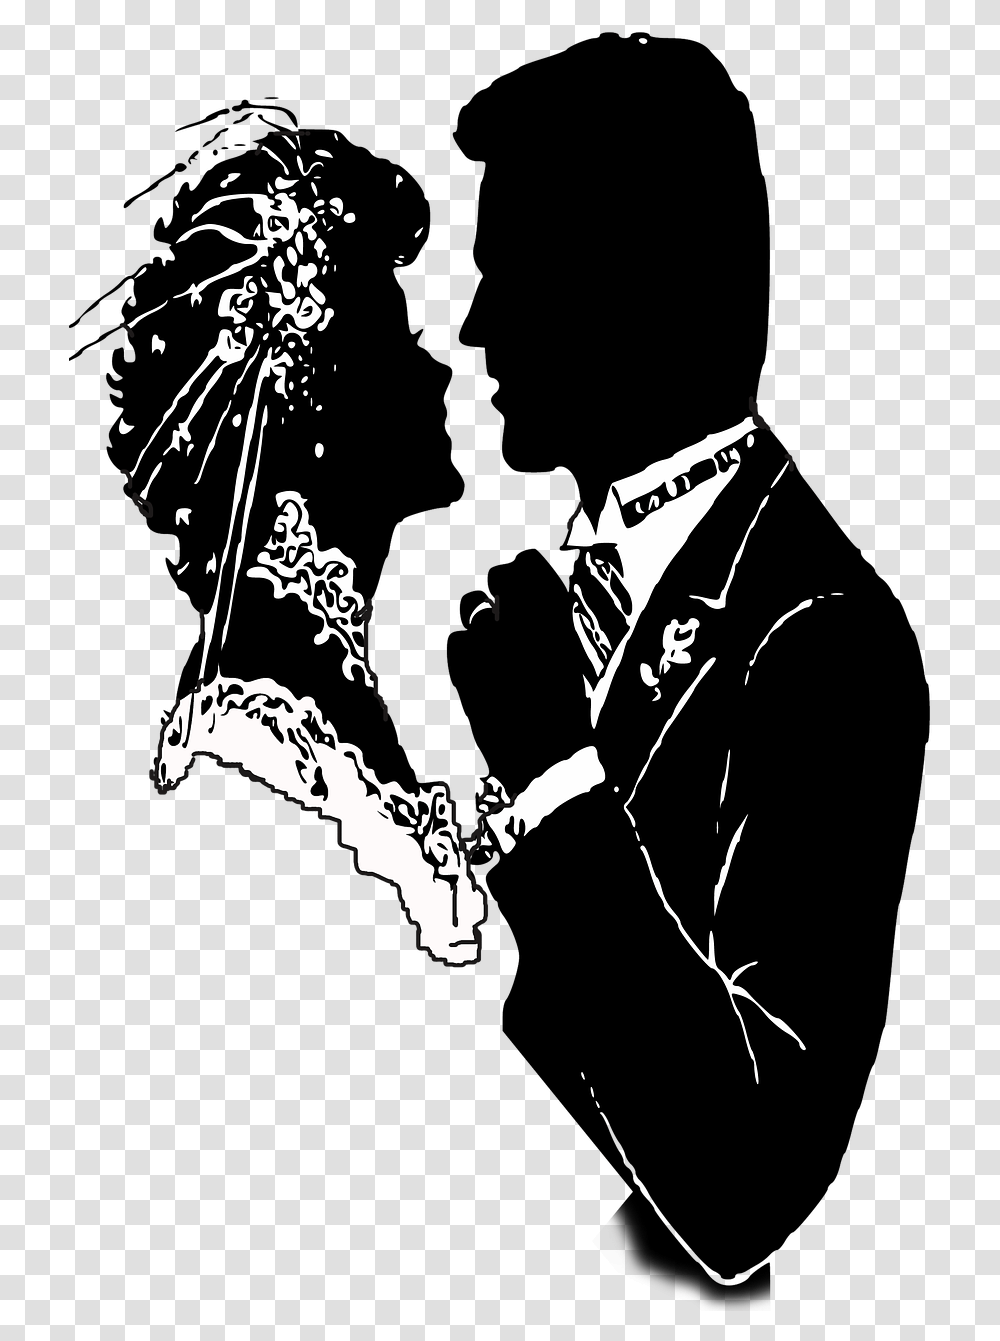 Groom And Bride Images In, Person, Military Uniform, Officer Transparent Png